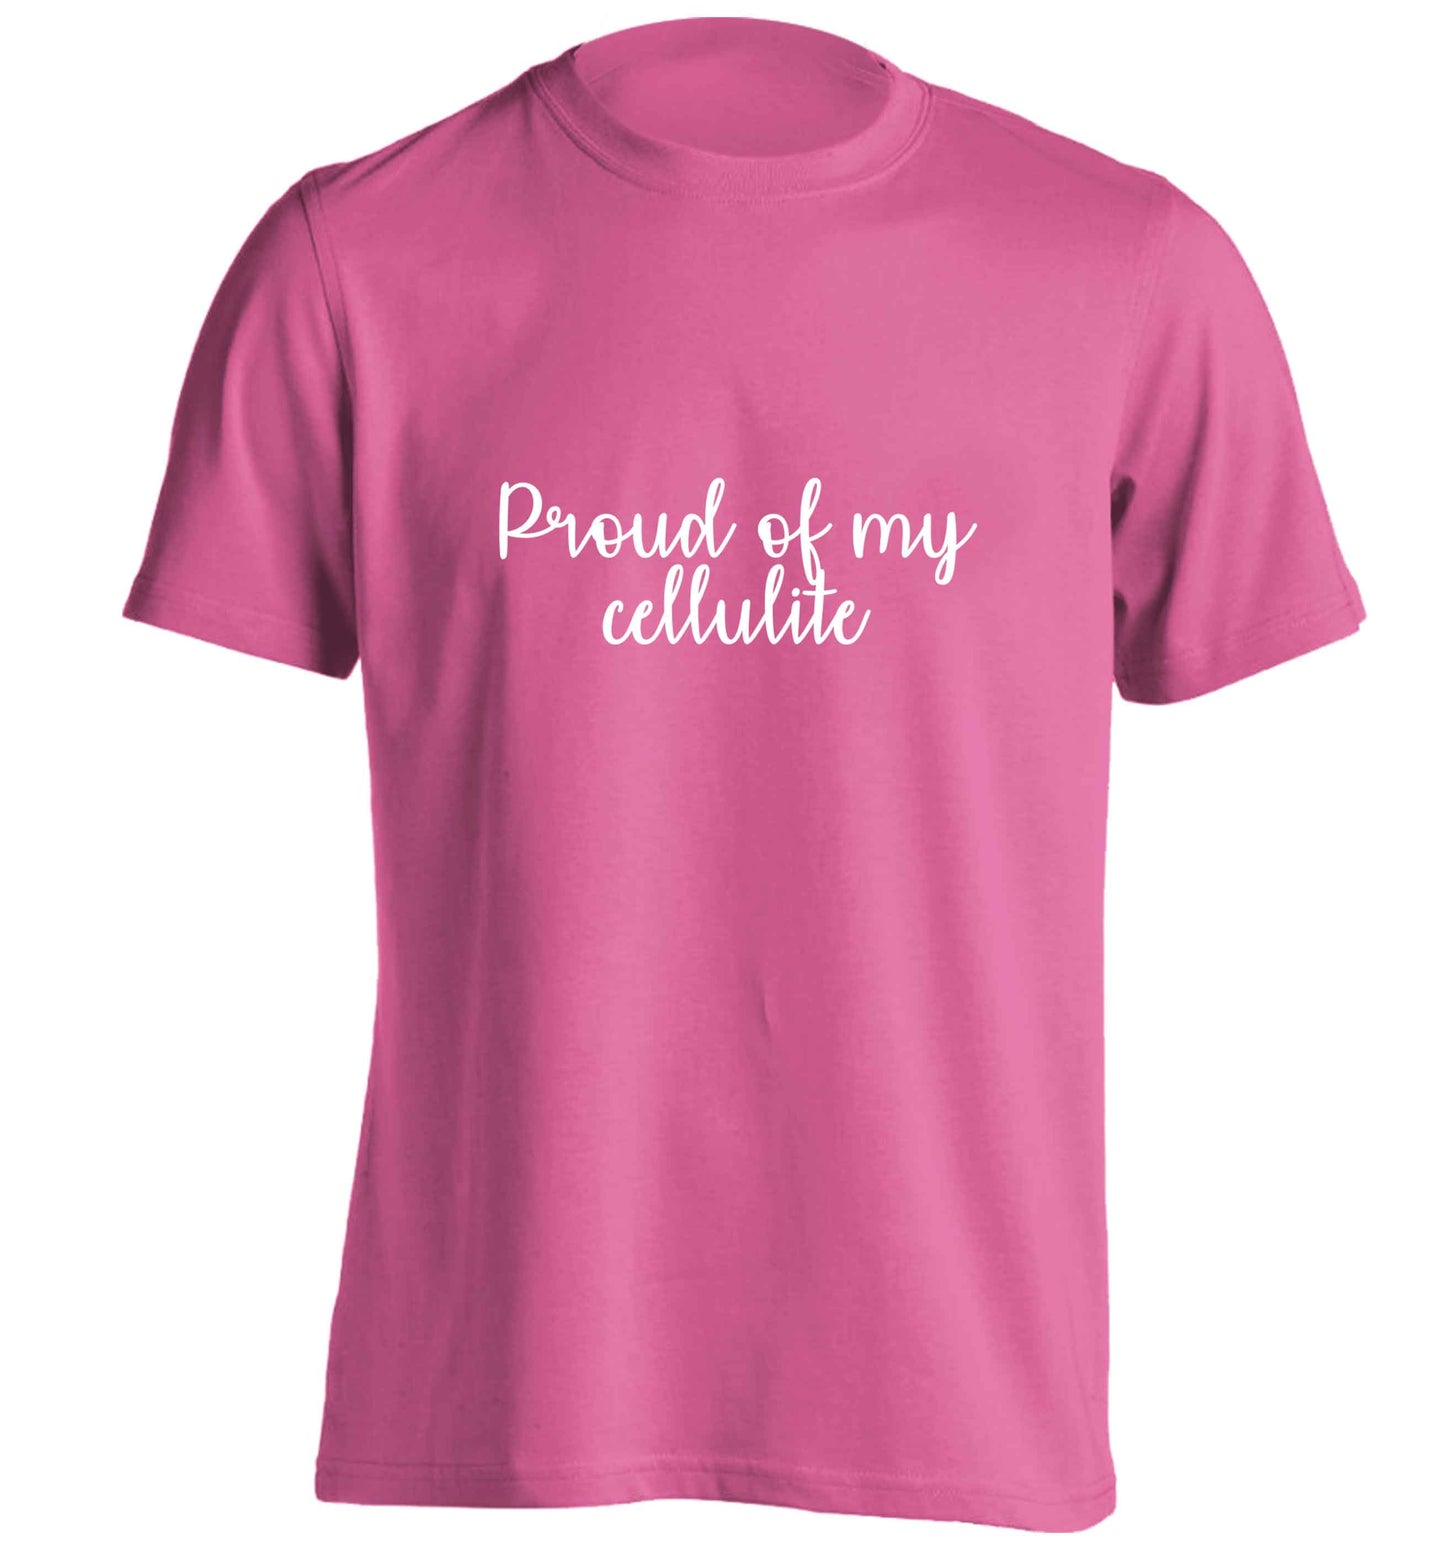 Proud of my cellulite adults unisex pink Tshirt 2XL